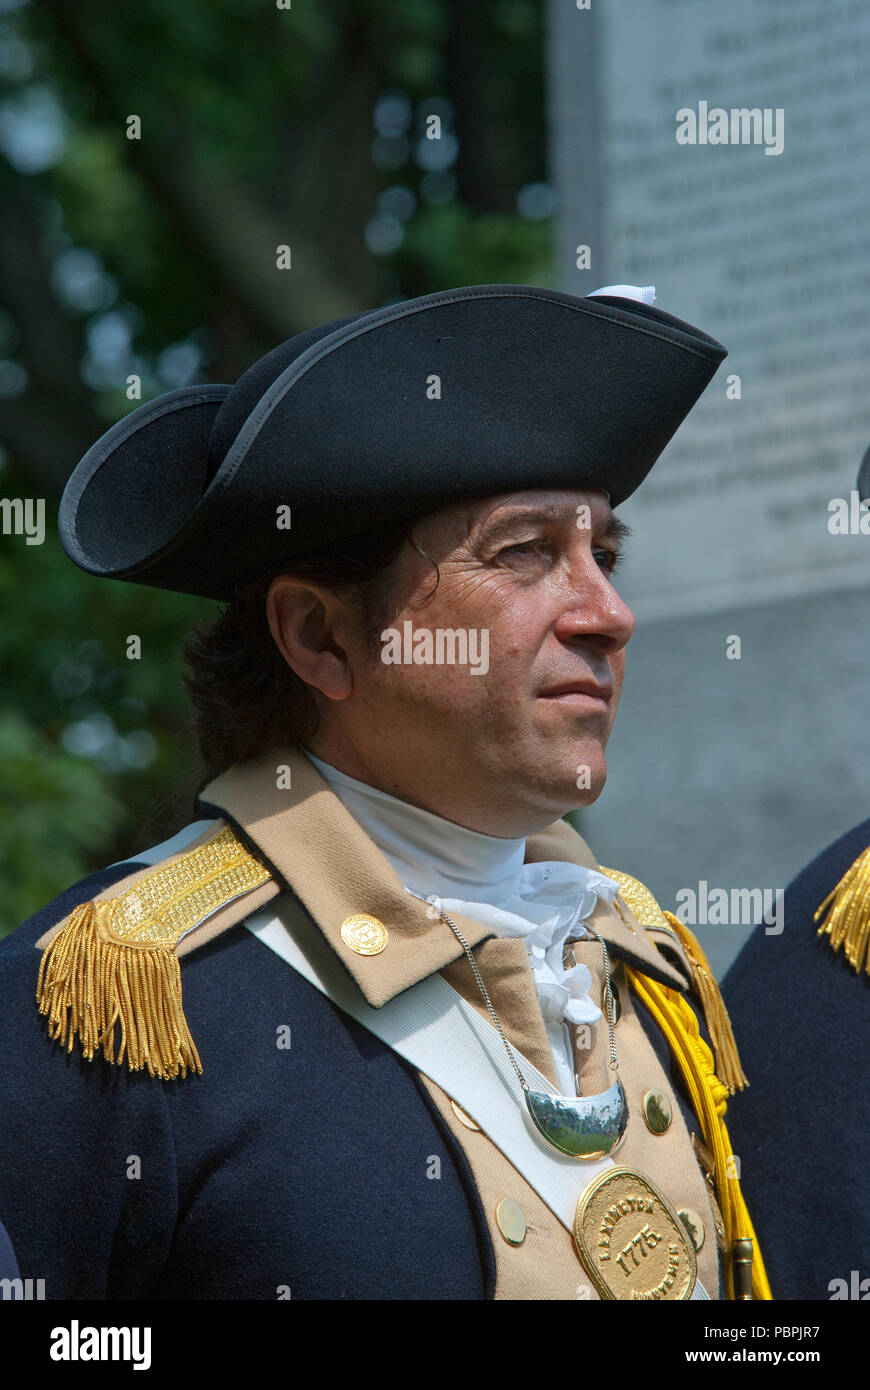 Man in military uniform to reenact the American War of Independence, Lexington Battle Green, Lexington, Middlesex County, Massachusetts, USA Stock Photo